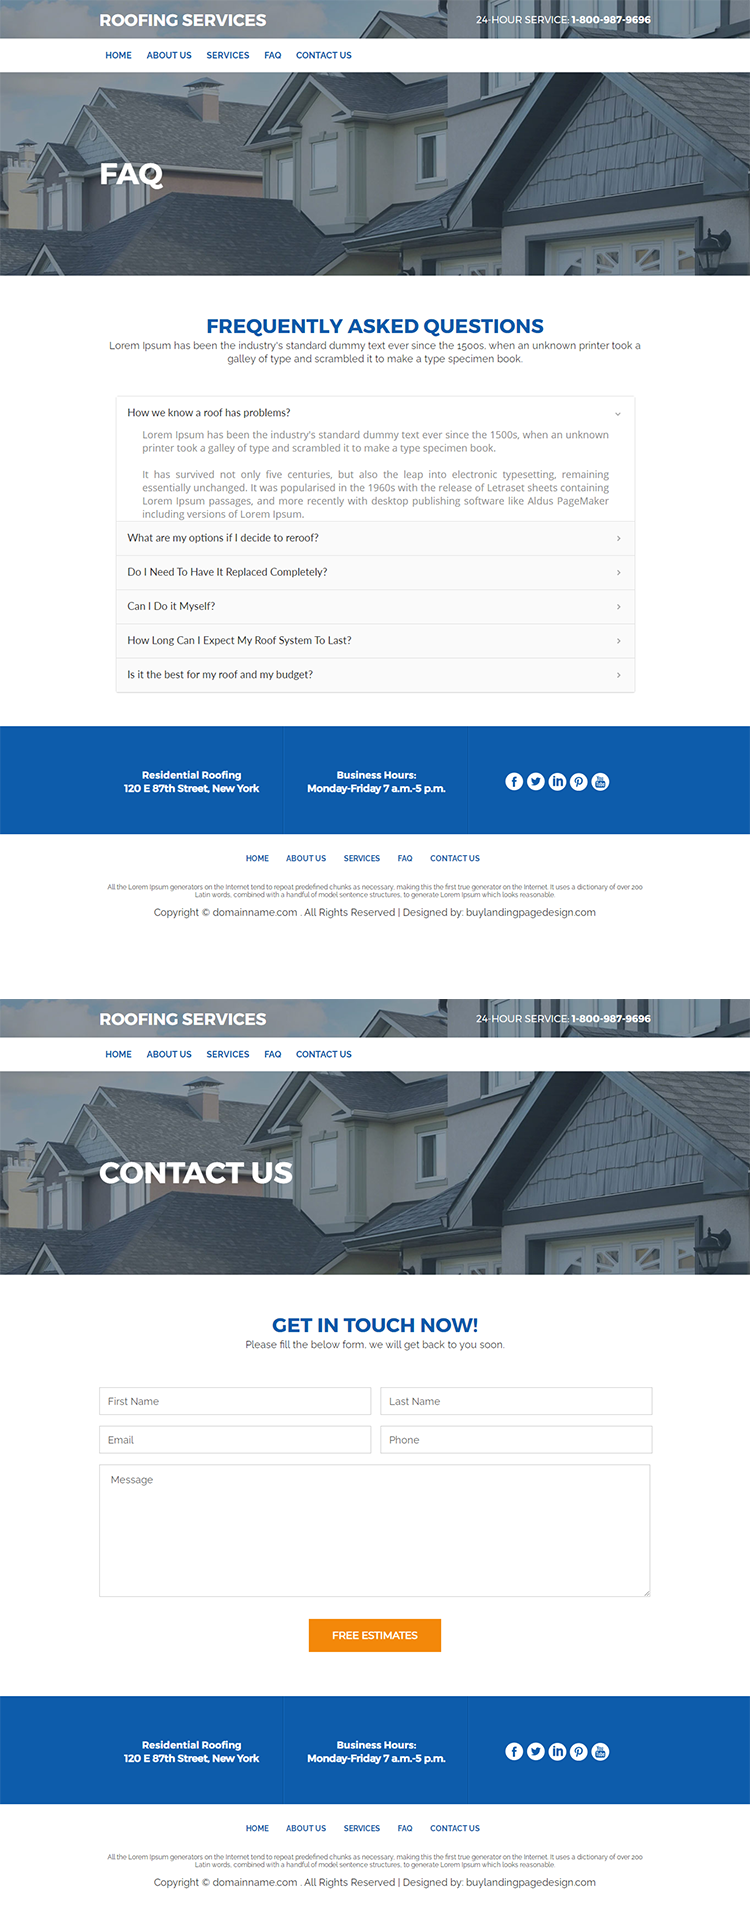 roof repair and replacement services responsive website design